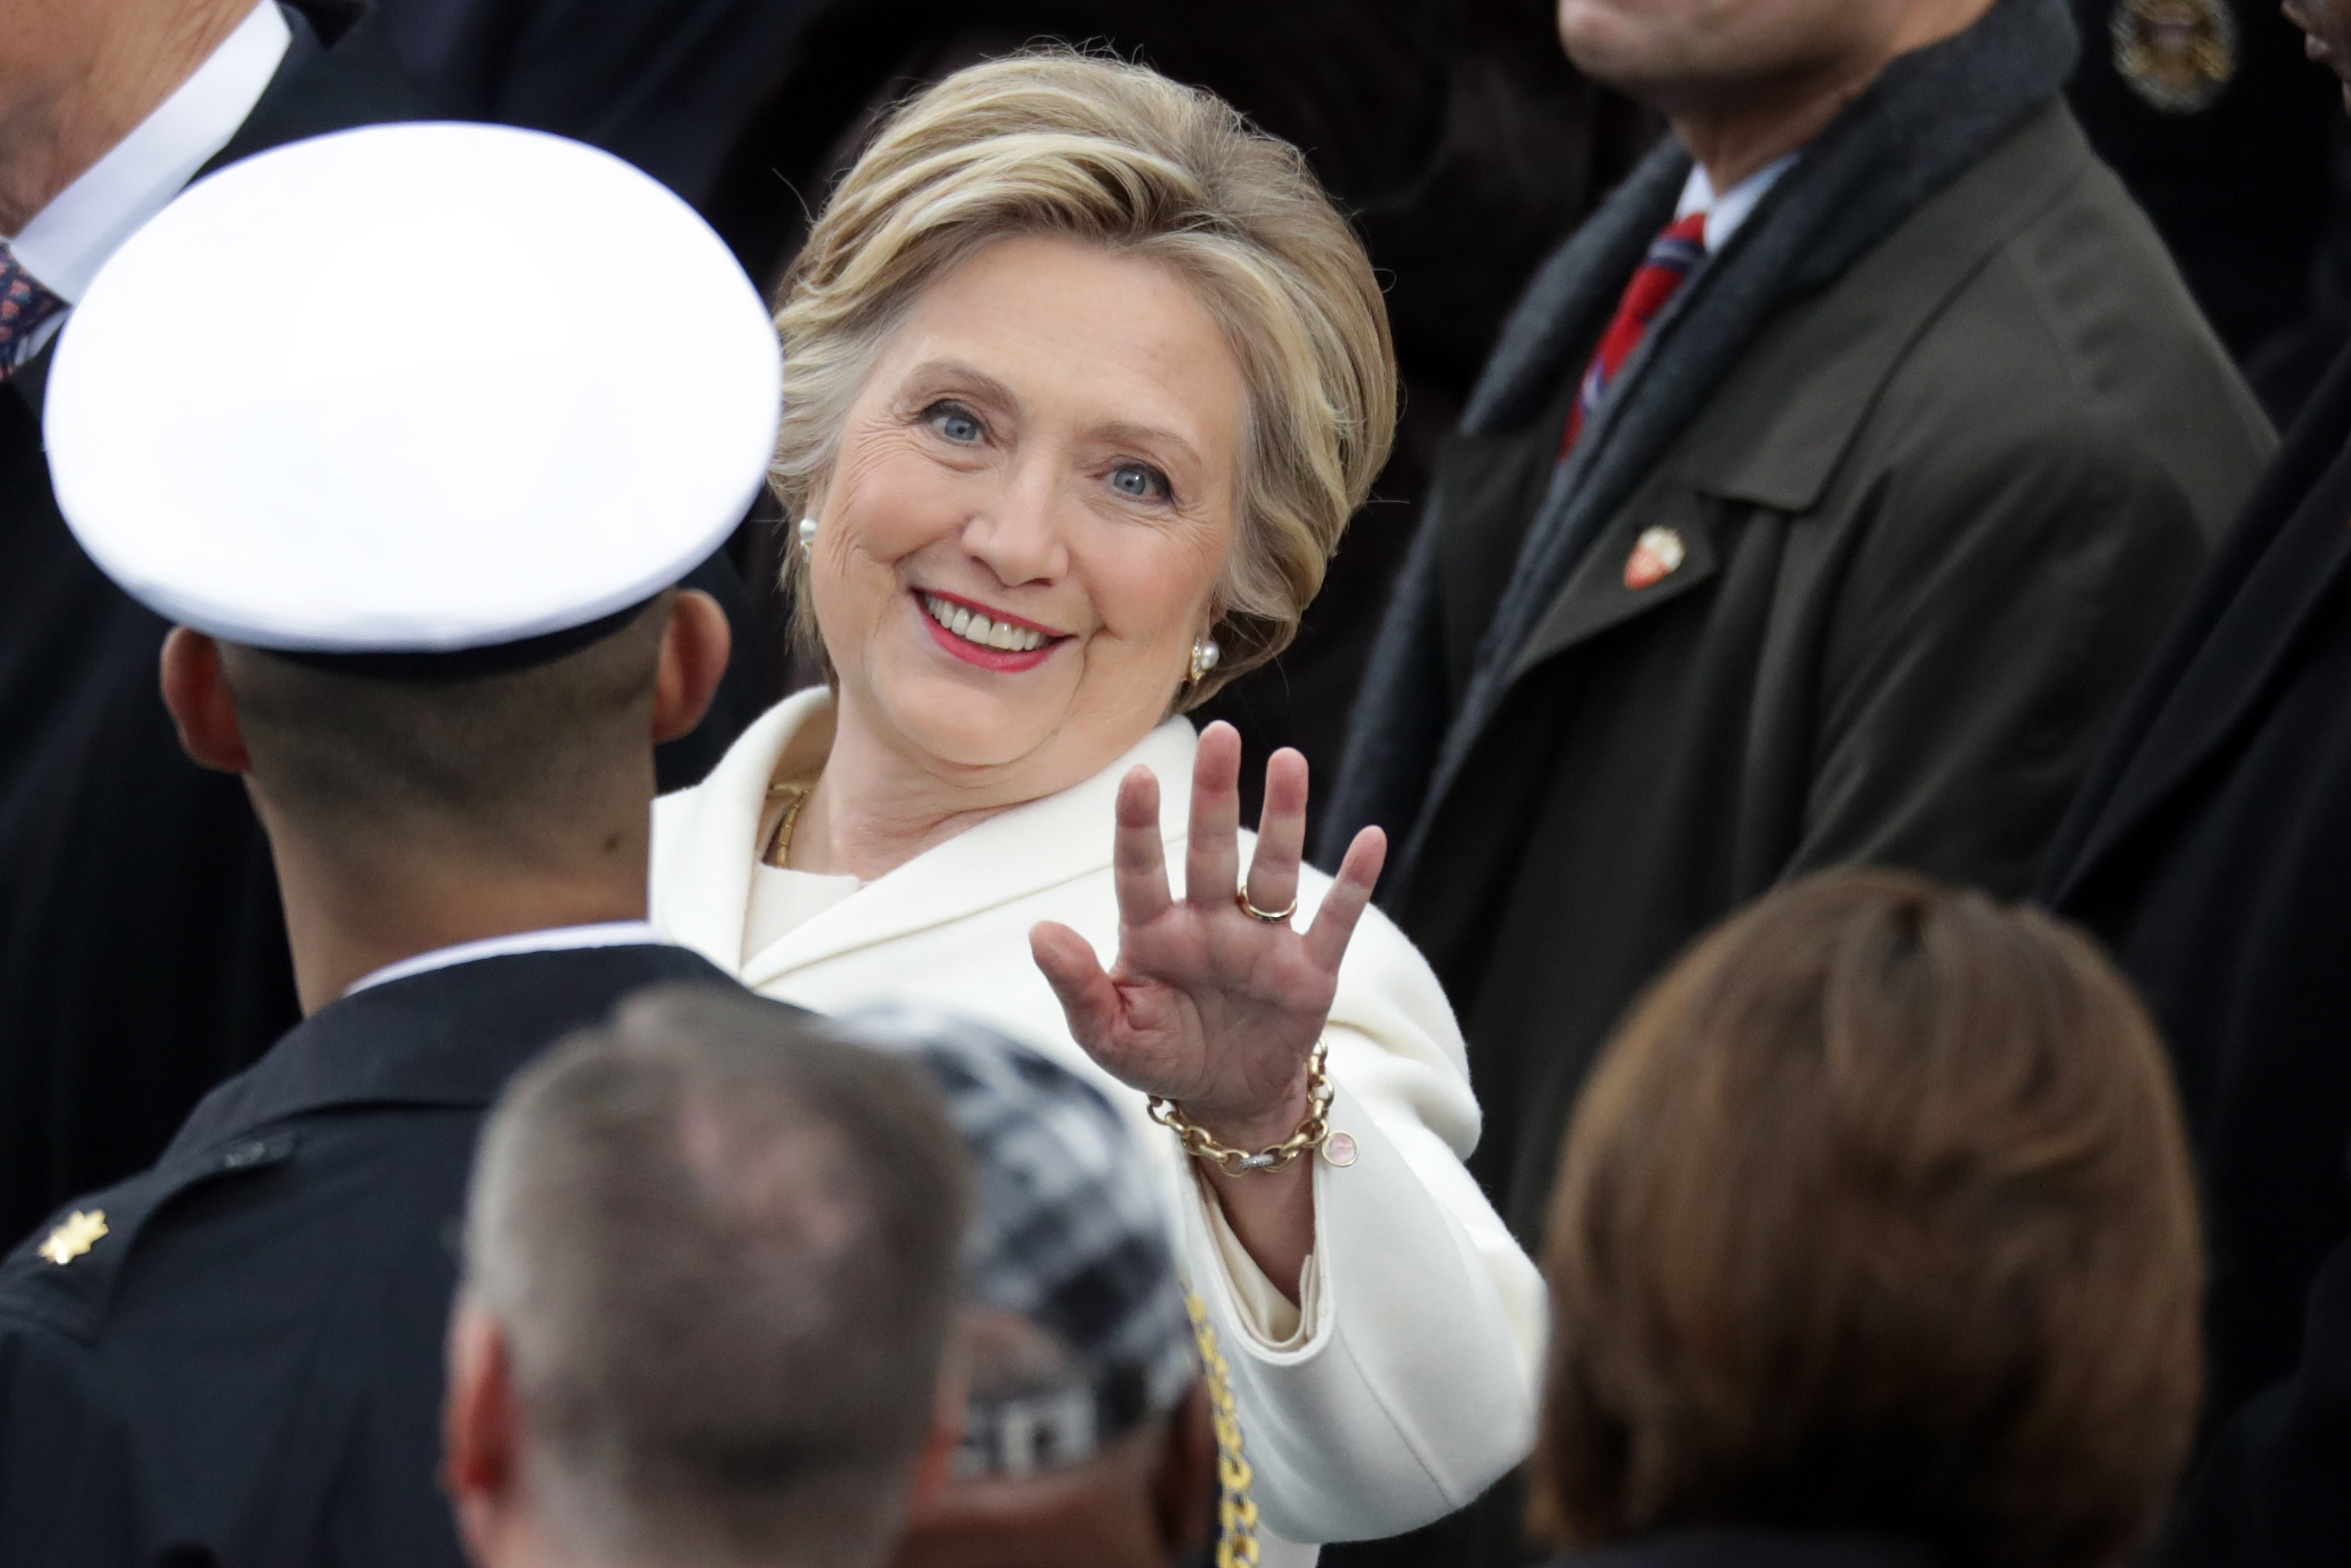 Former Democratic presidential nominee Hillary Clinton arrives on the West Front of the U.S. Capitol on Jan. 20, 2017 for Donald Trump's inauguration. (Chip Somodevilla/Getty Images)